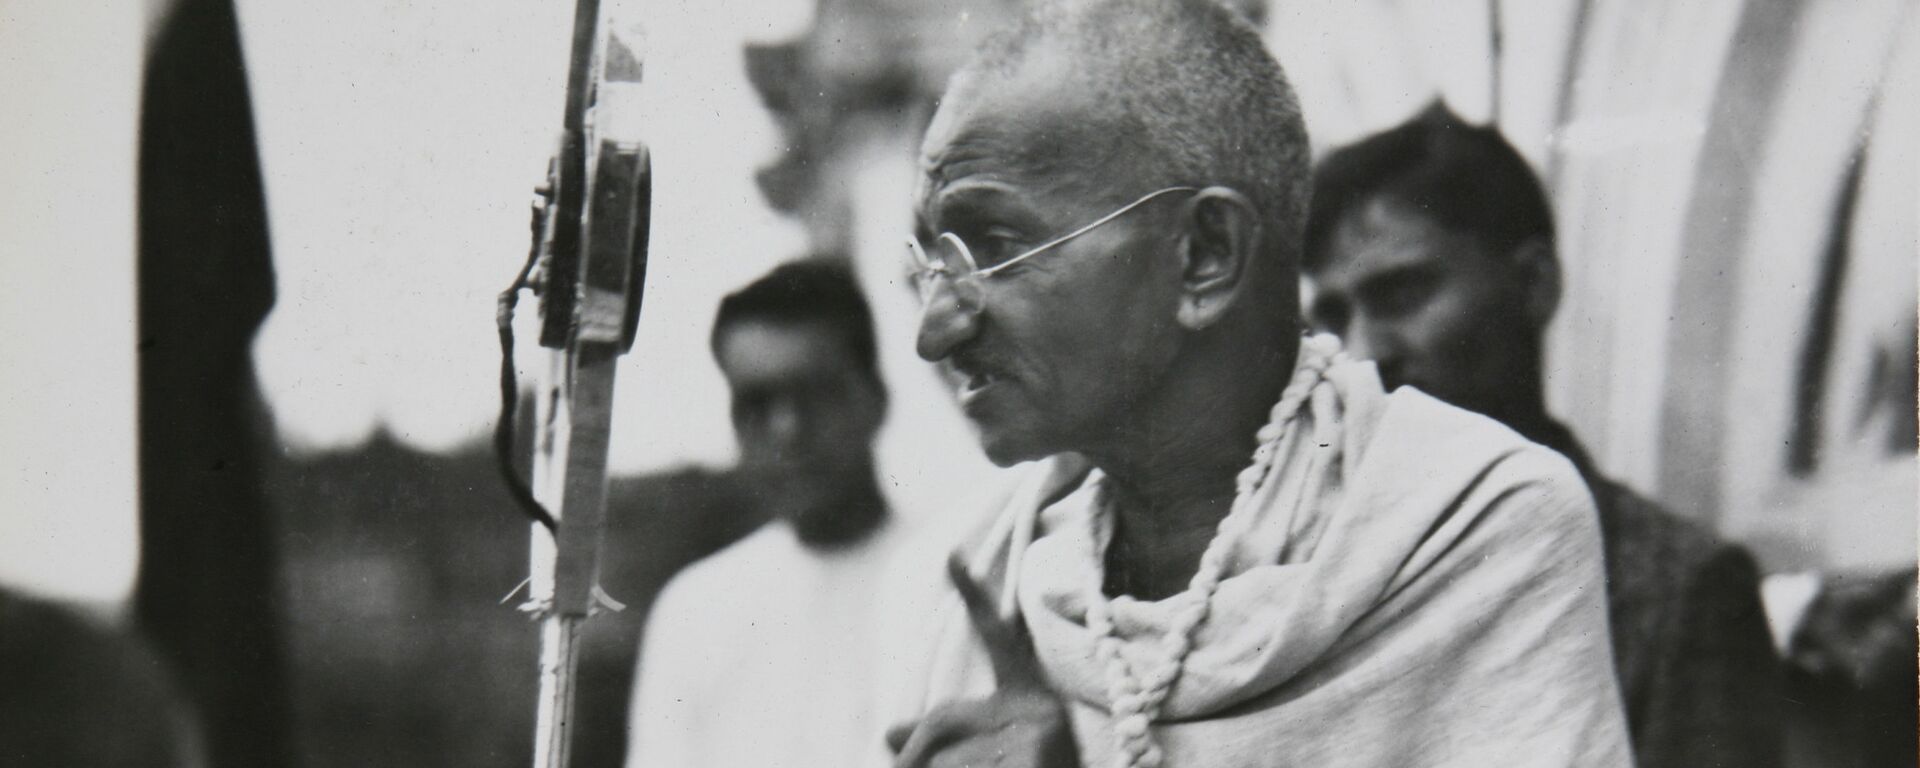 Mahatma Gandhi in a photo from a period album collected by AP reporter James A. Mills, ca. 1931. - Sputnik International, 1920, 22.08.2020